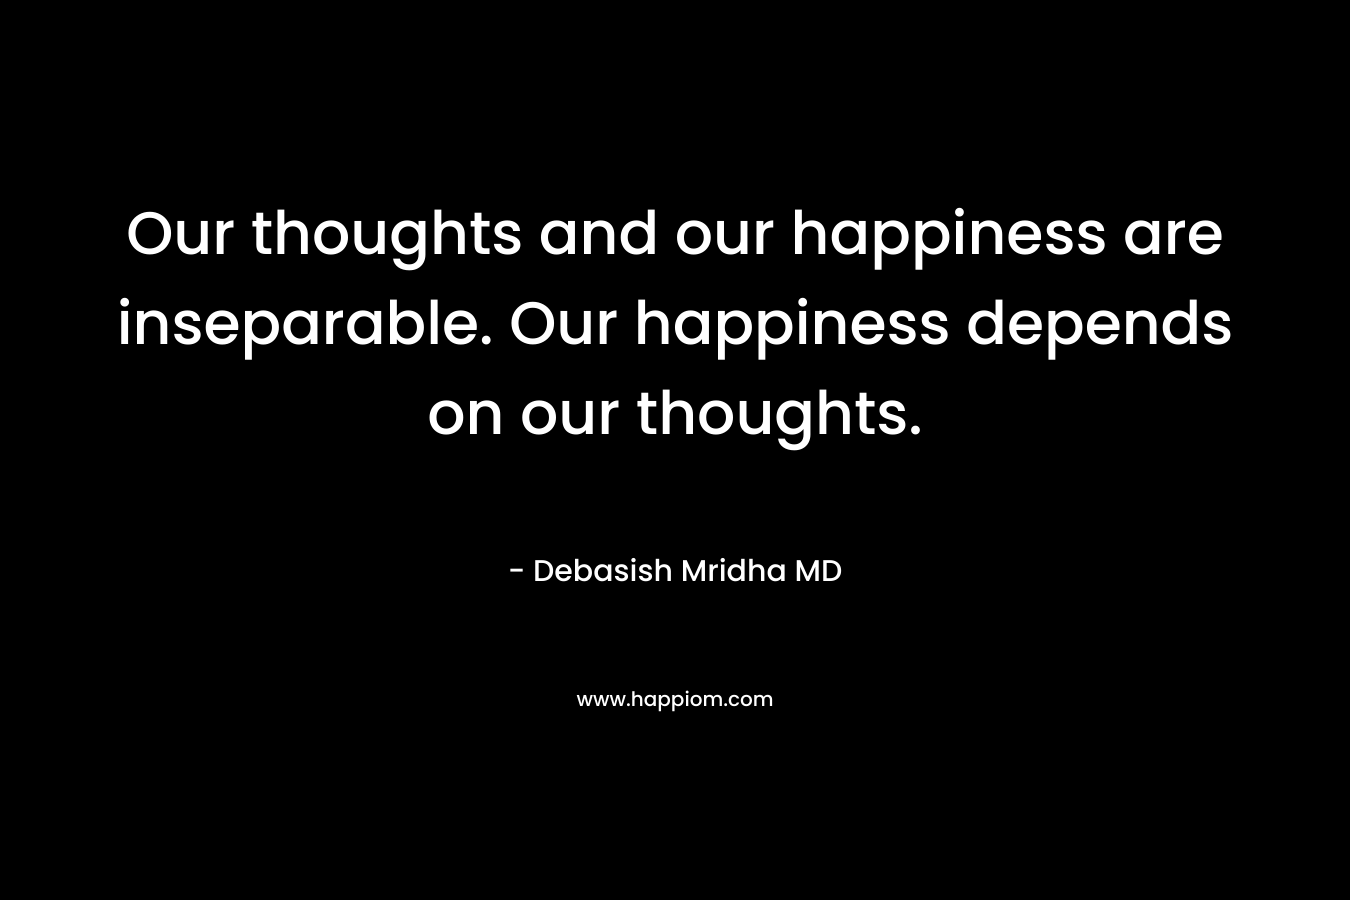 Our thoughts and our happiness are inseparable. Our happiness depends on our thoughts.